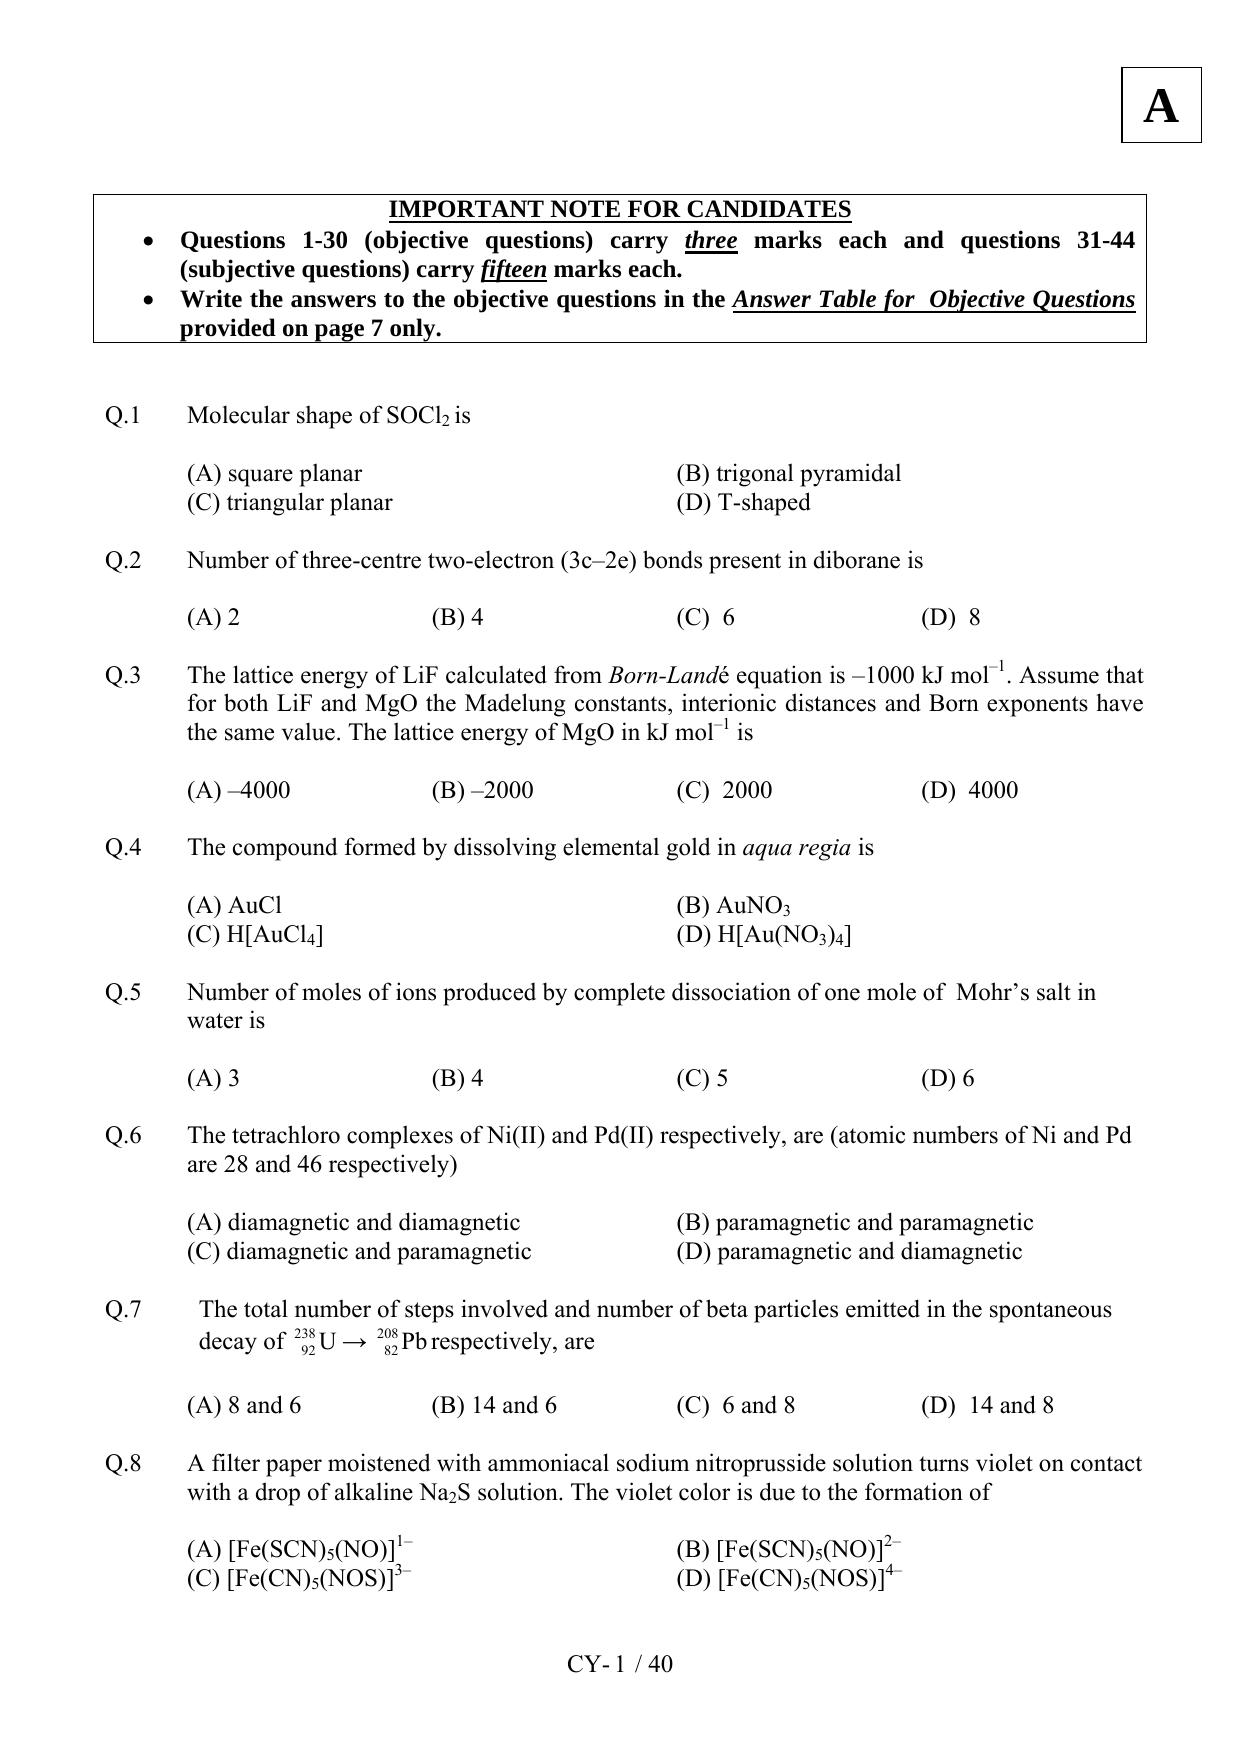 JAM 2012: CY Question Paper - Page 3